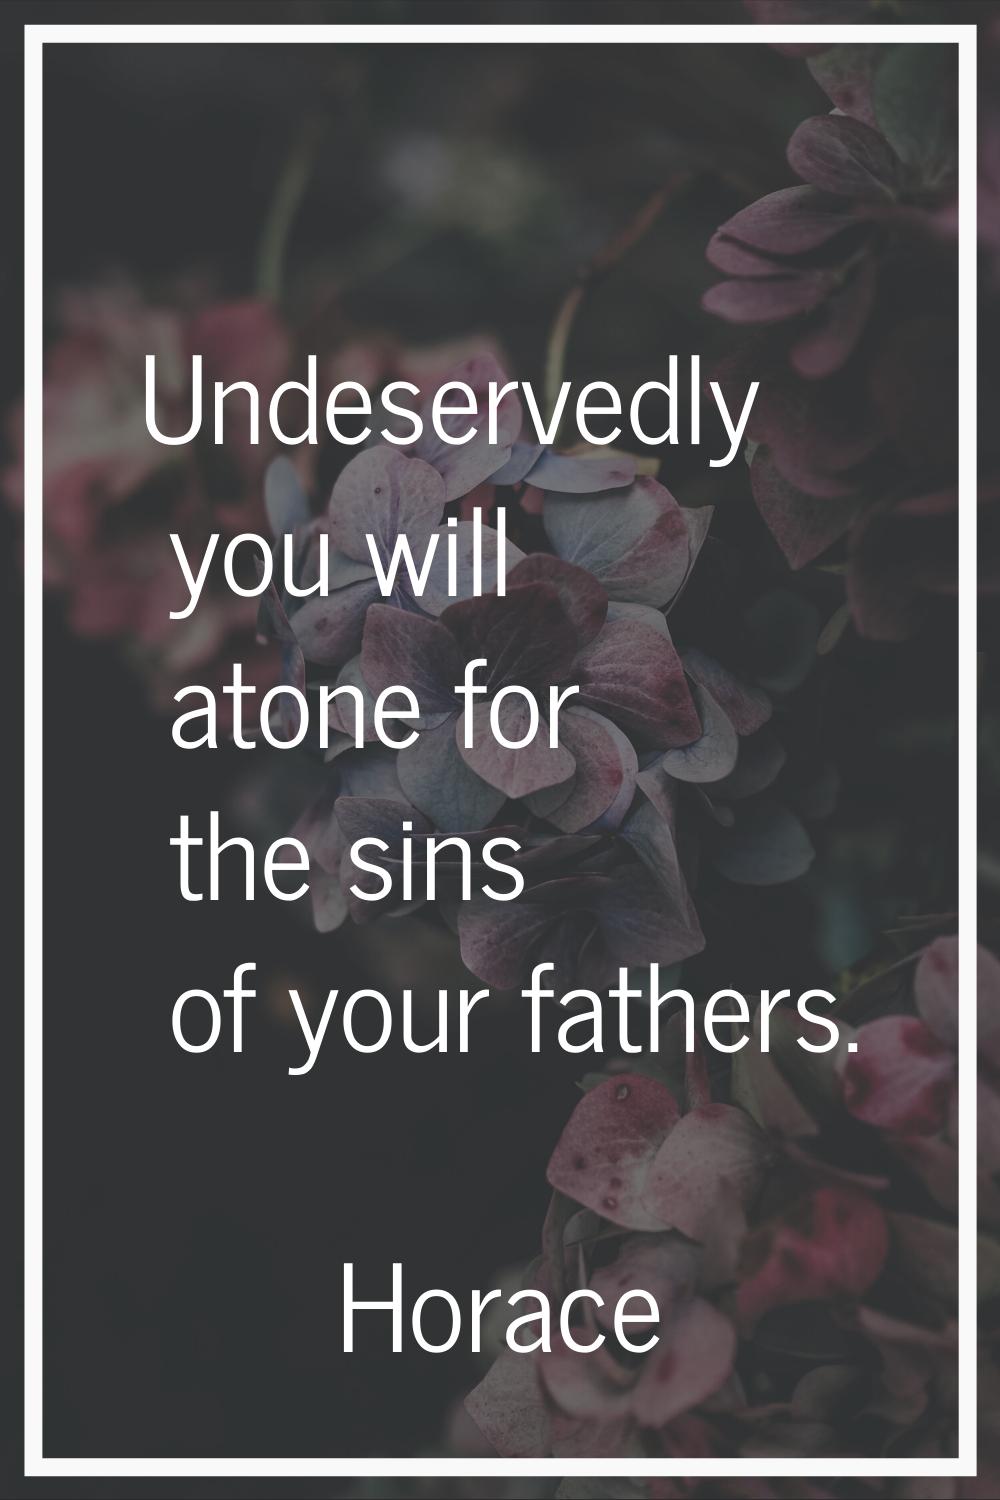 Undeservedly you will atone for the sins of your fathers.